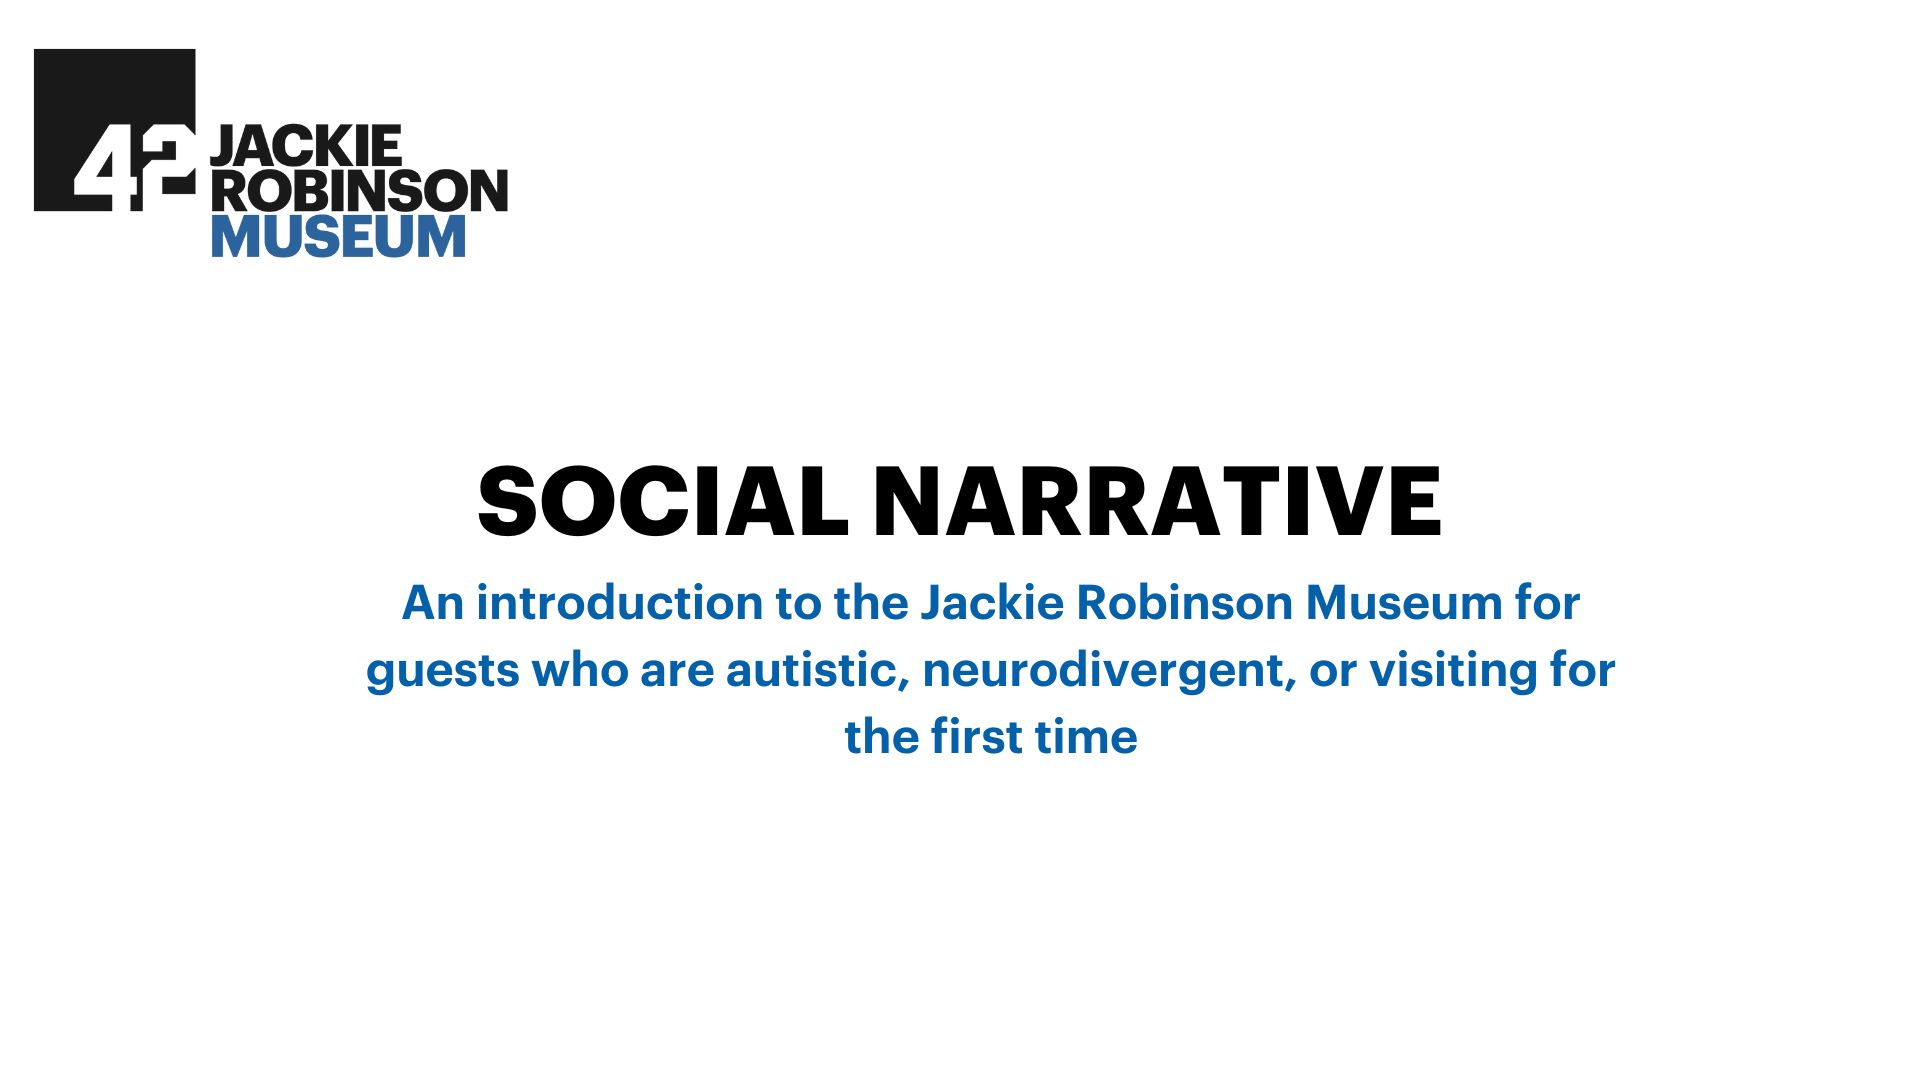 First slide of the Social Narrative with black and blue font on a white background and the Museum logo in the corner. Reads: "Social Narrative: An introduction to the Jackie Robinson Museum for guests who are autistic, neurodivergent, or visiting for the first time."